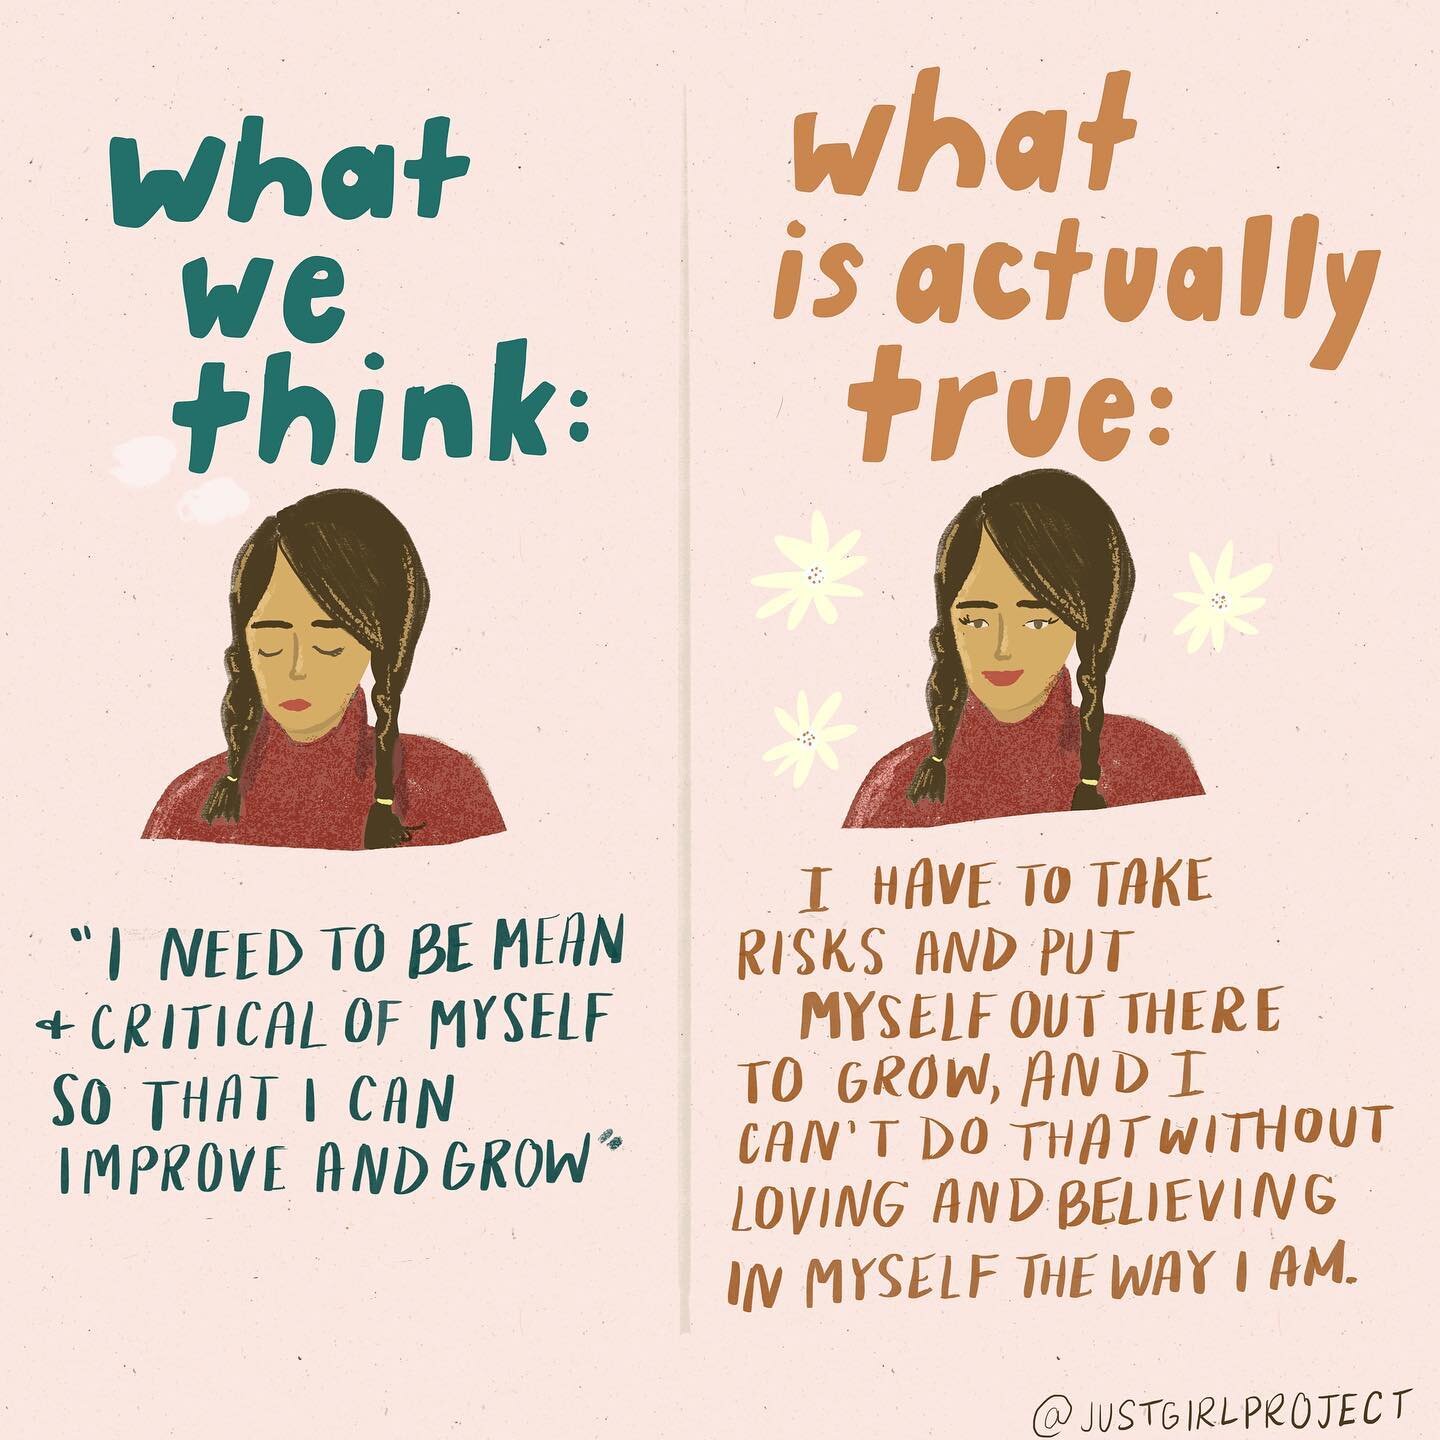 Happy weekend! Here is a drawing I made for @justgirlproject about believing in yourself and believing that good things can happen too 💭